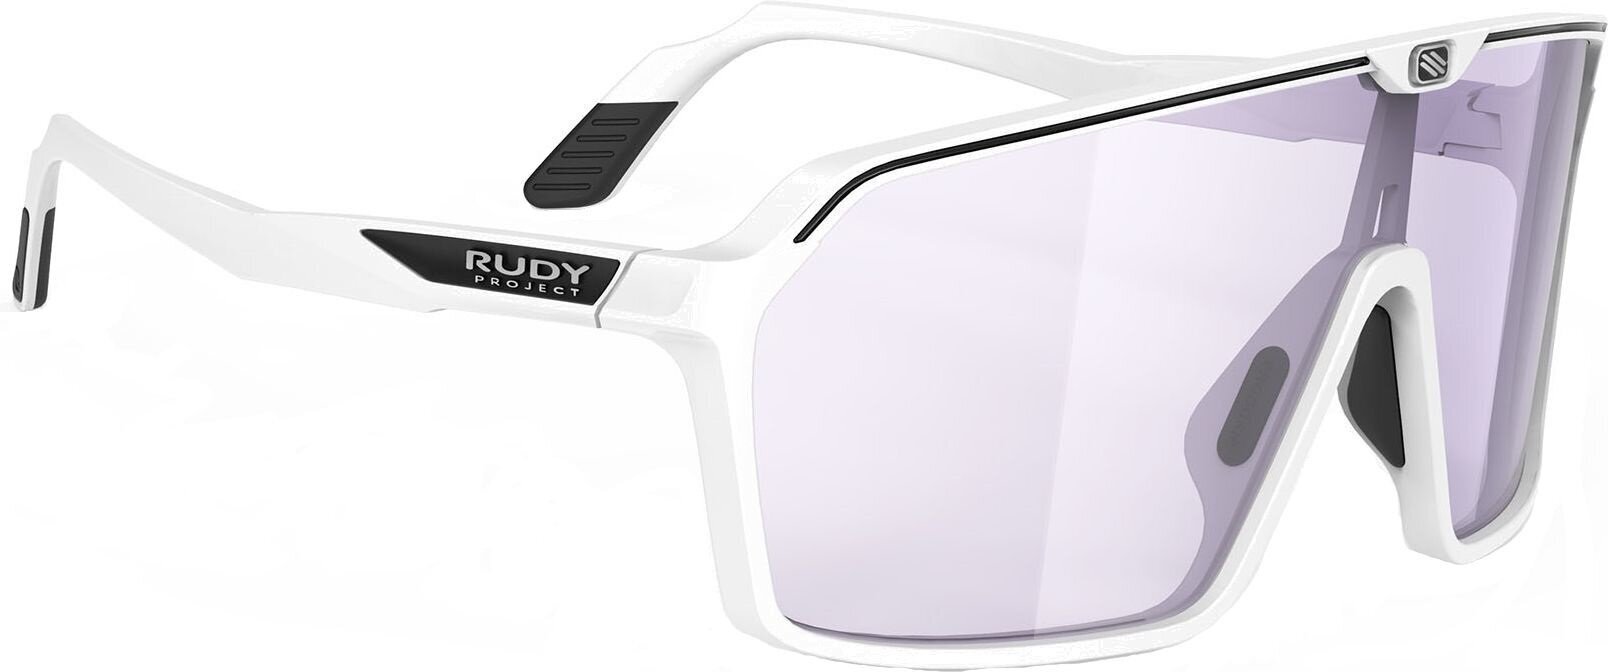 Lifestyle Glasses Rudy Project Spinshield Lifestyle Glasses